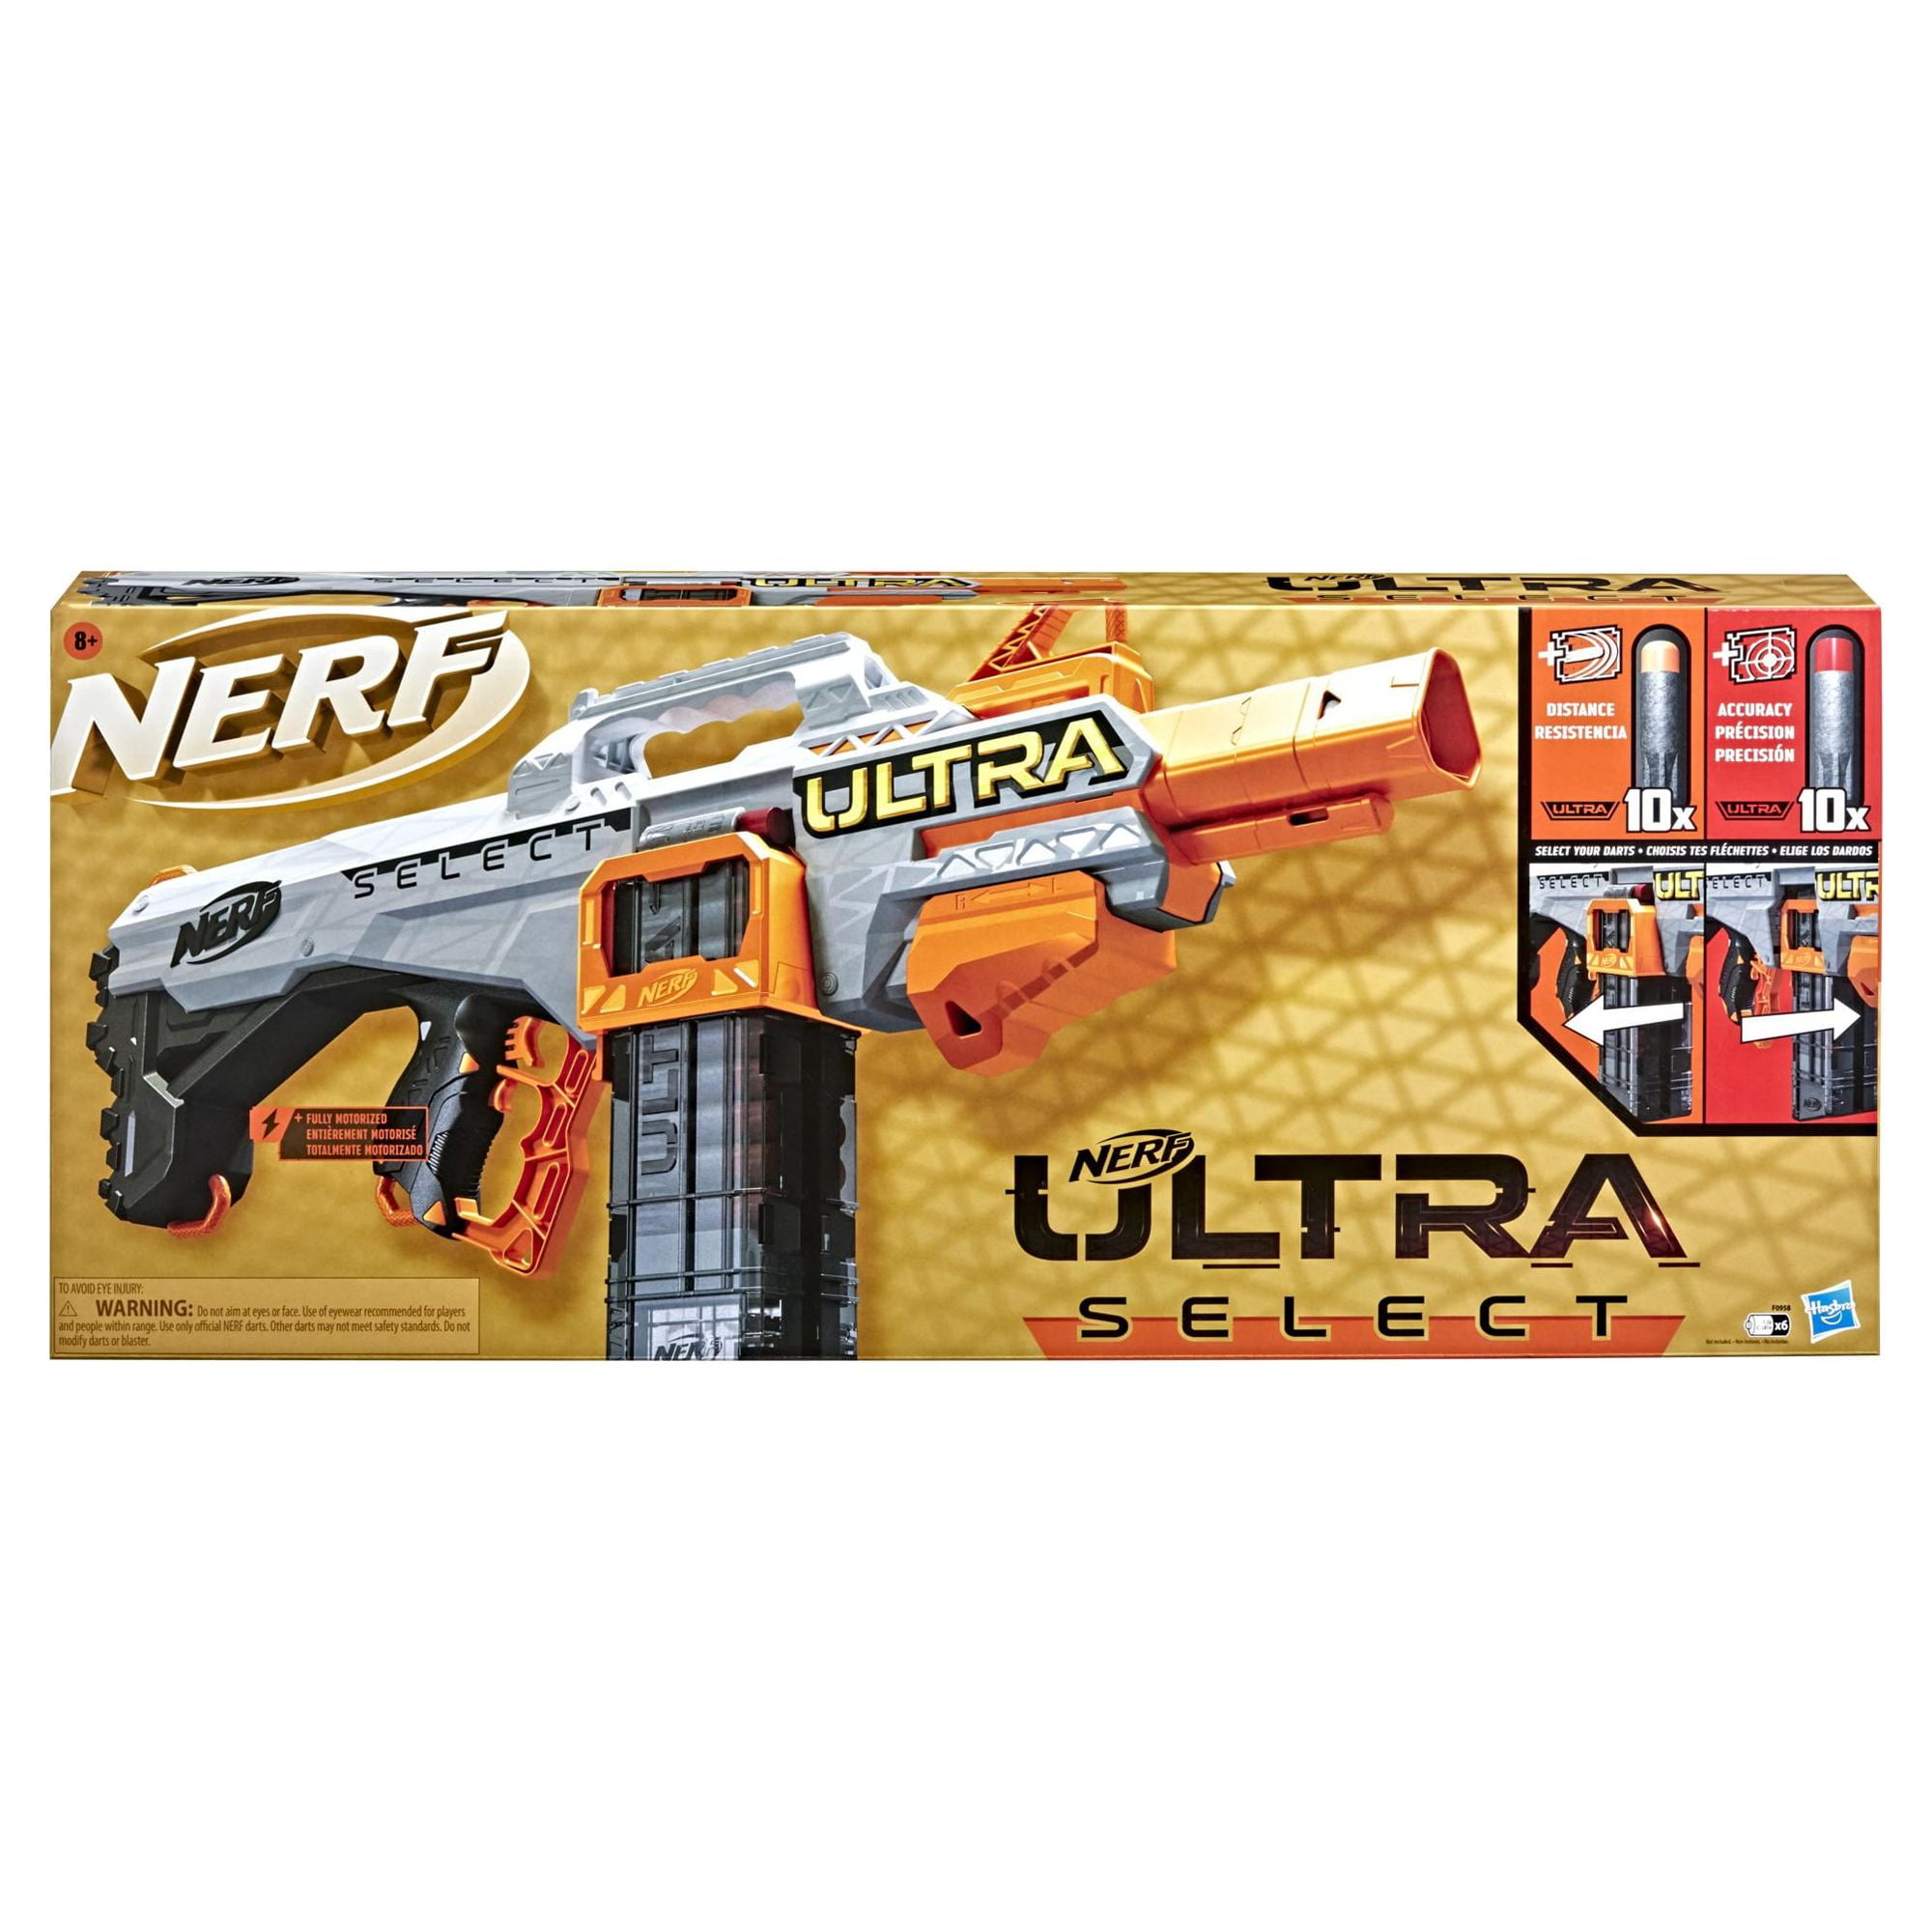 Nerf Ultra Select Fully Motorized Blaster, Fire 2 Ways, Includes Clips and  Darts, Compatible Only with Nerf Ultra Darts